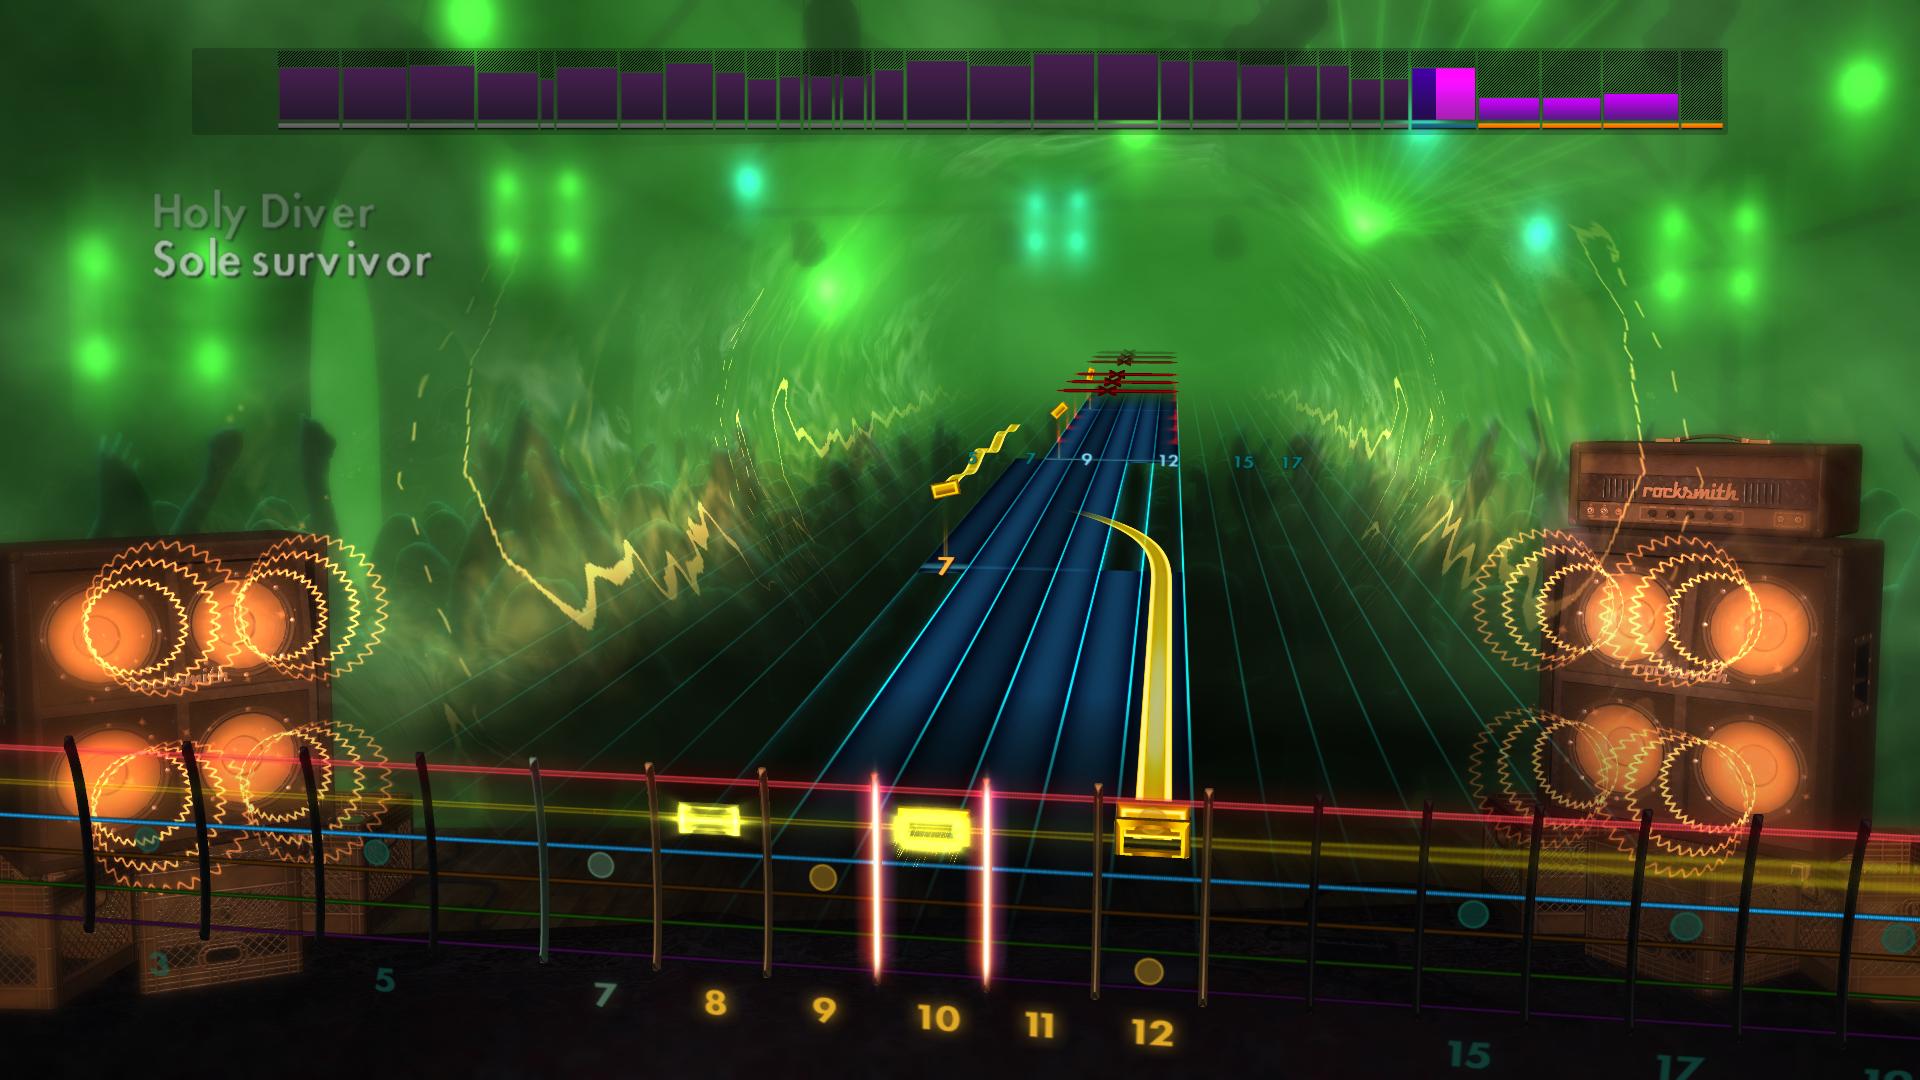 Rocksmith® 2014 – Killswitch Engage - “Holy Diver” Featured Screenshot #1